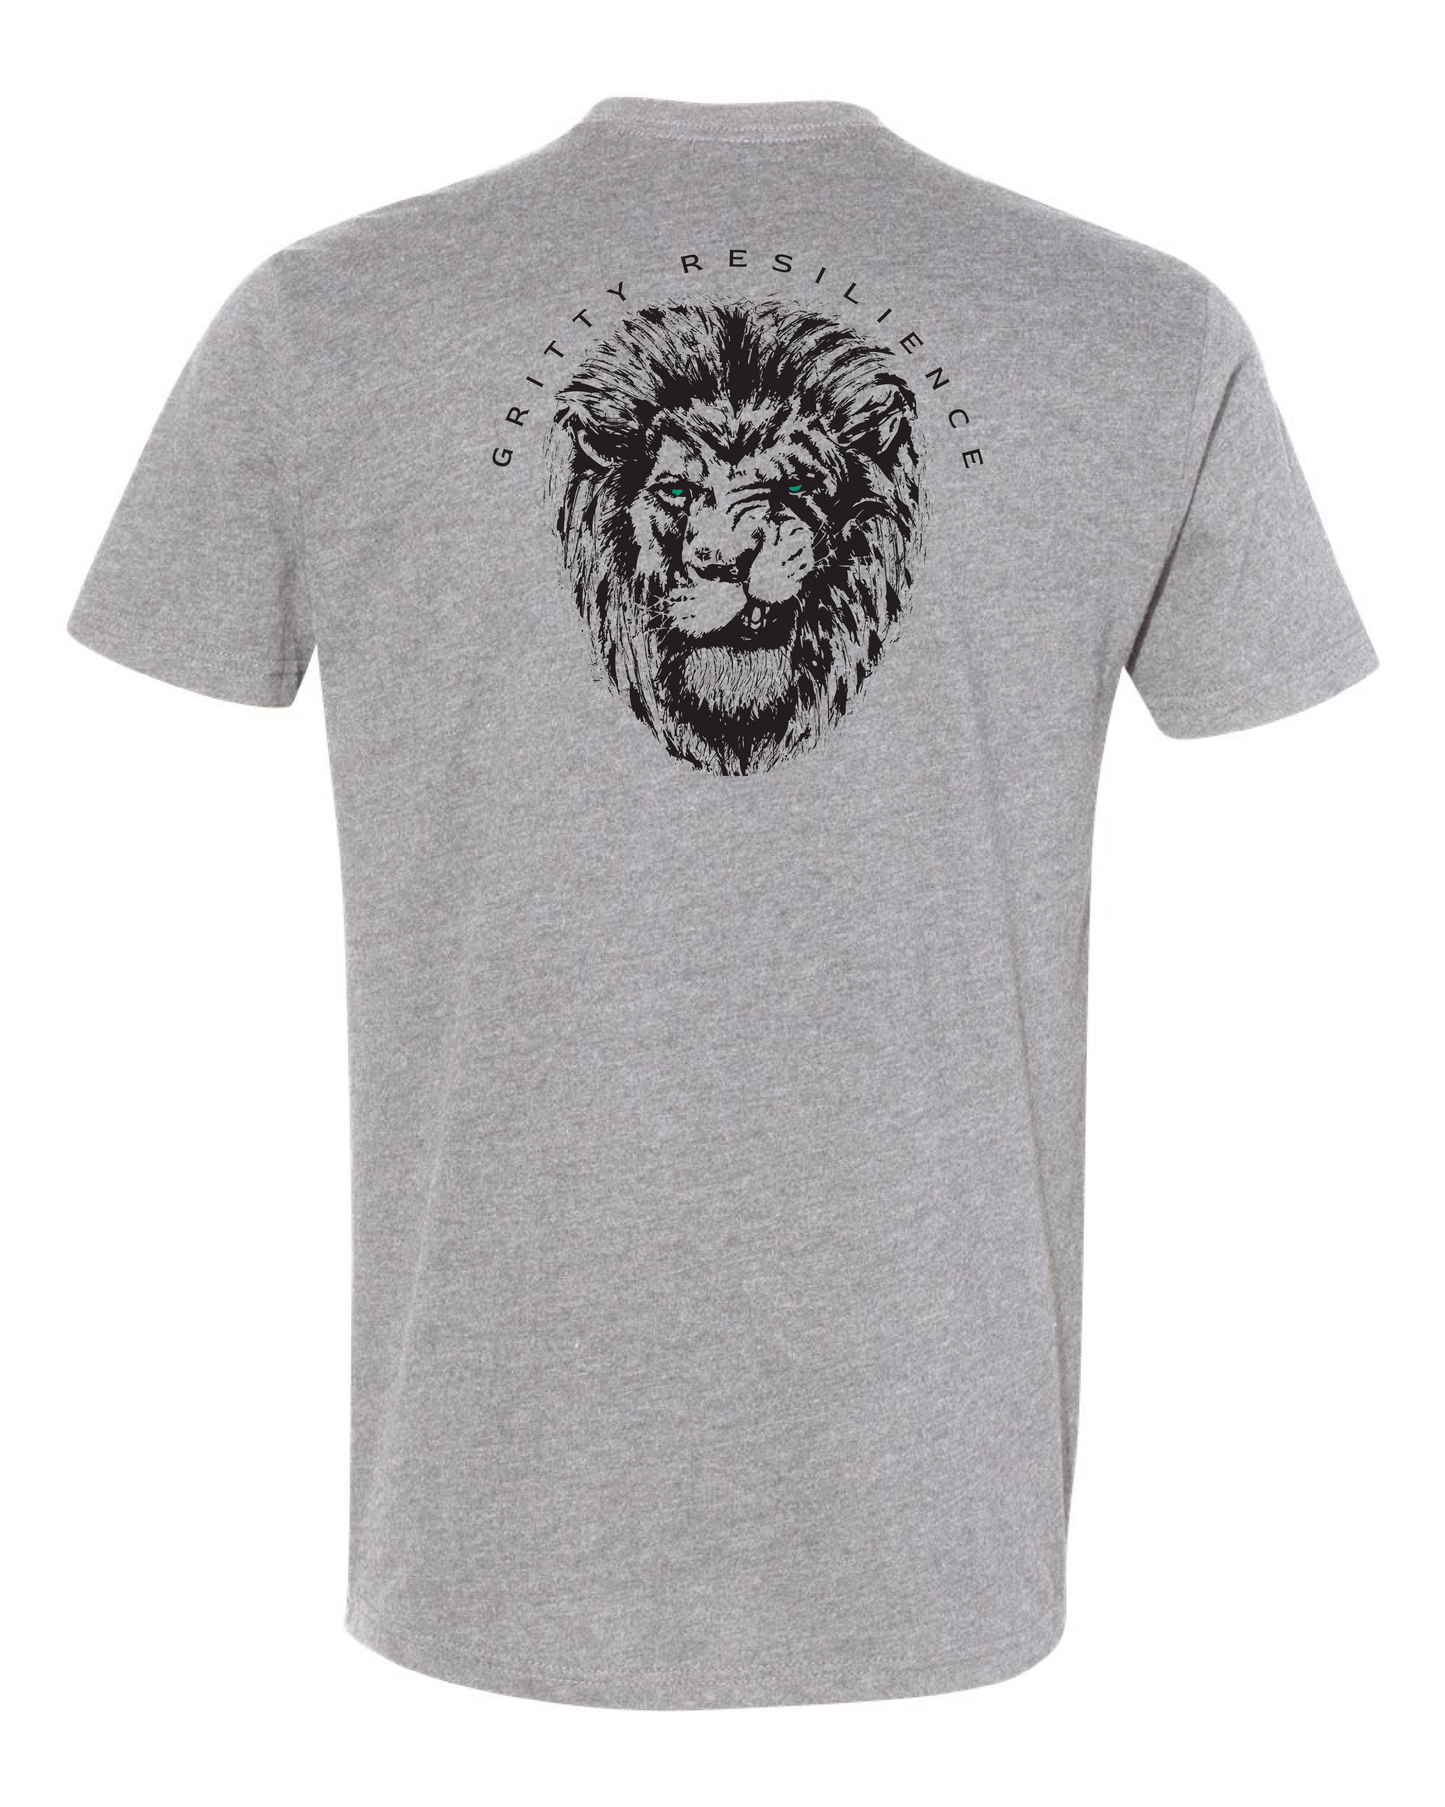 Gritty Lion Tee